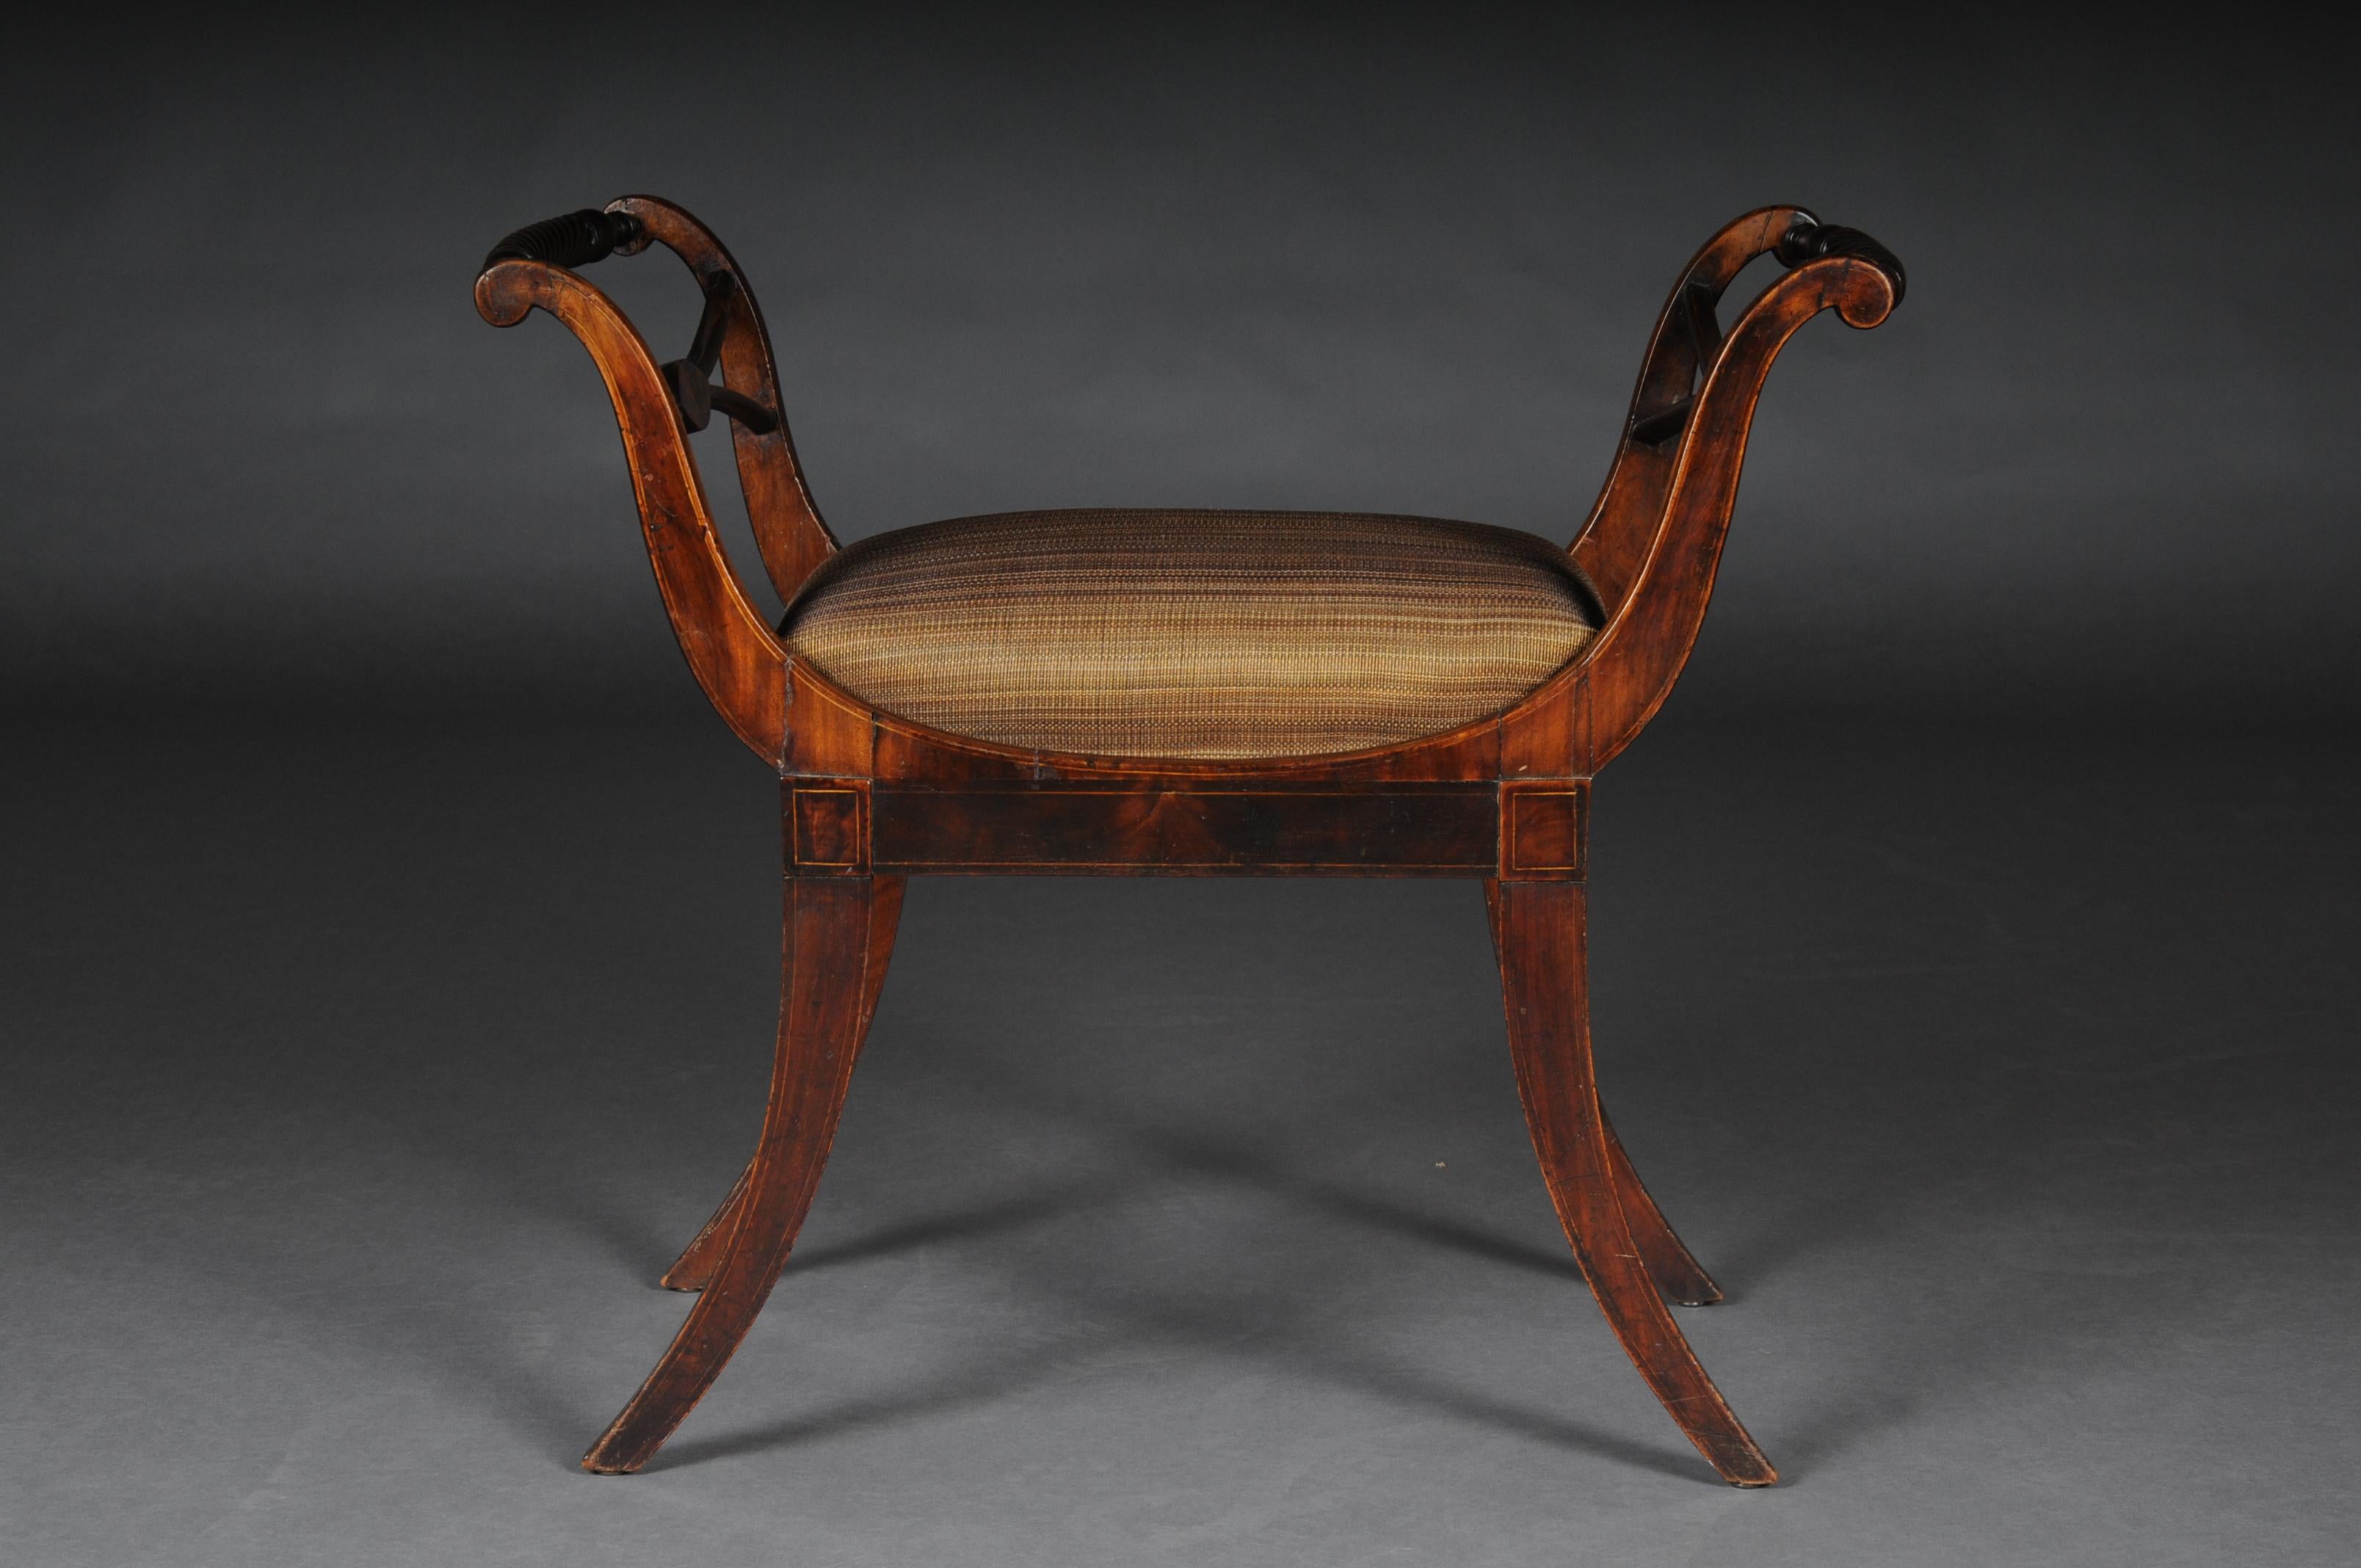 Antique Biedermeier gondola / stool circa 1820, horsehair.

Mahogany squares on solid wood. Classic removable seat which is upholstered with horsehair.

(B - 156).
 